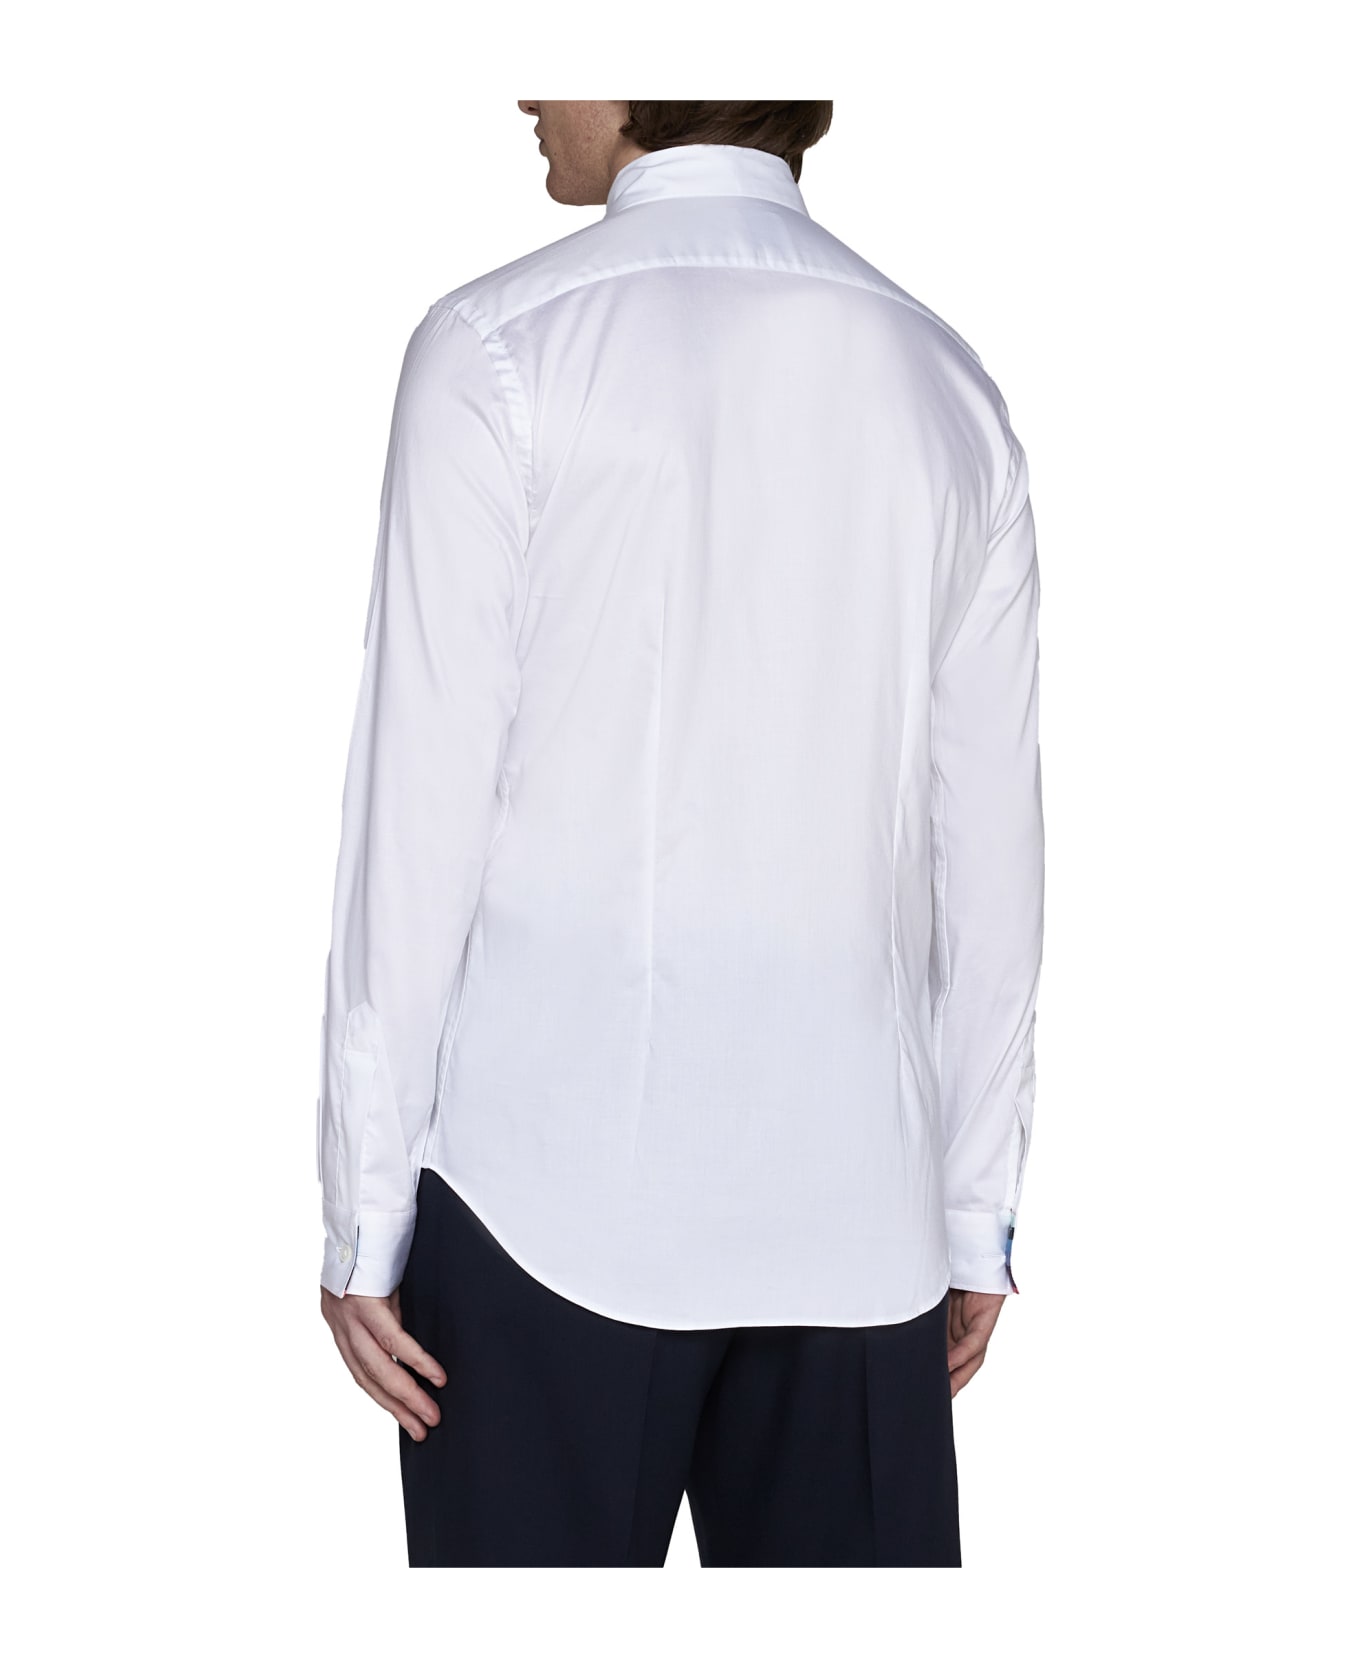 Paul Smith Shirt - Offwh シャツ